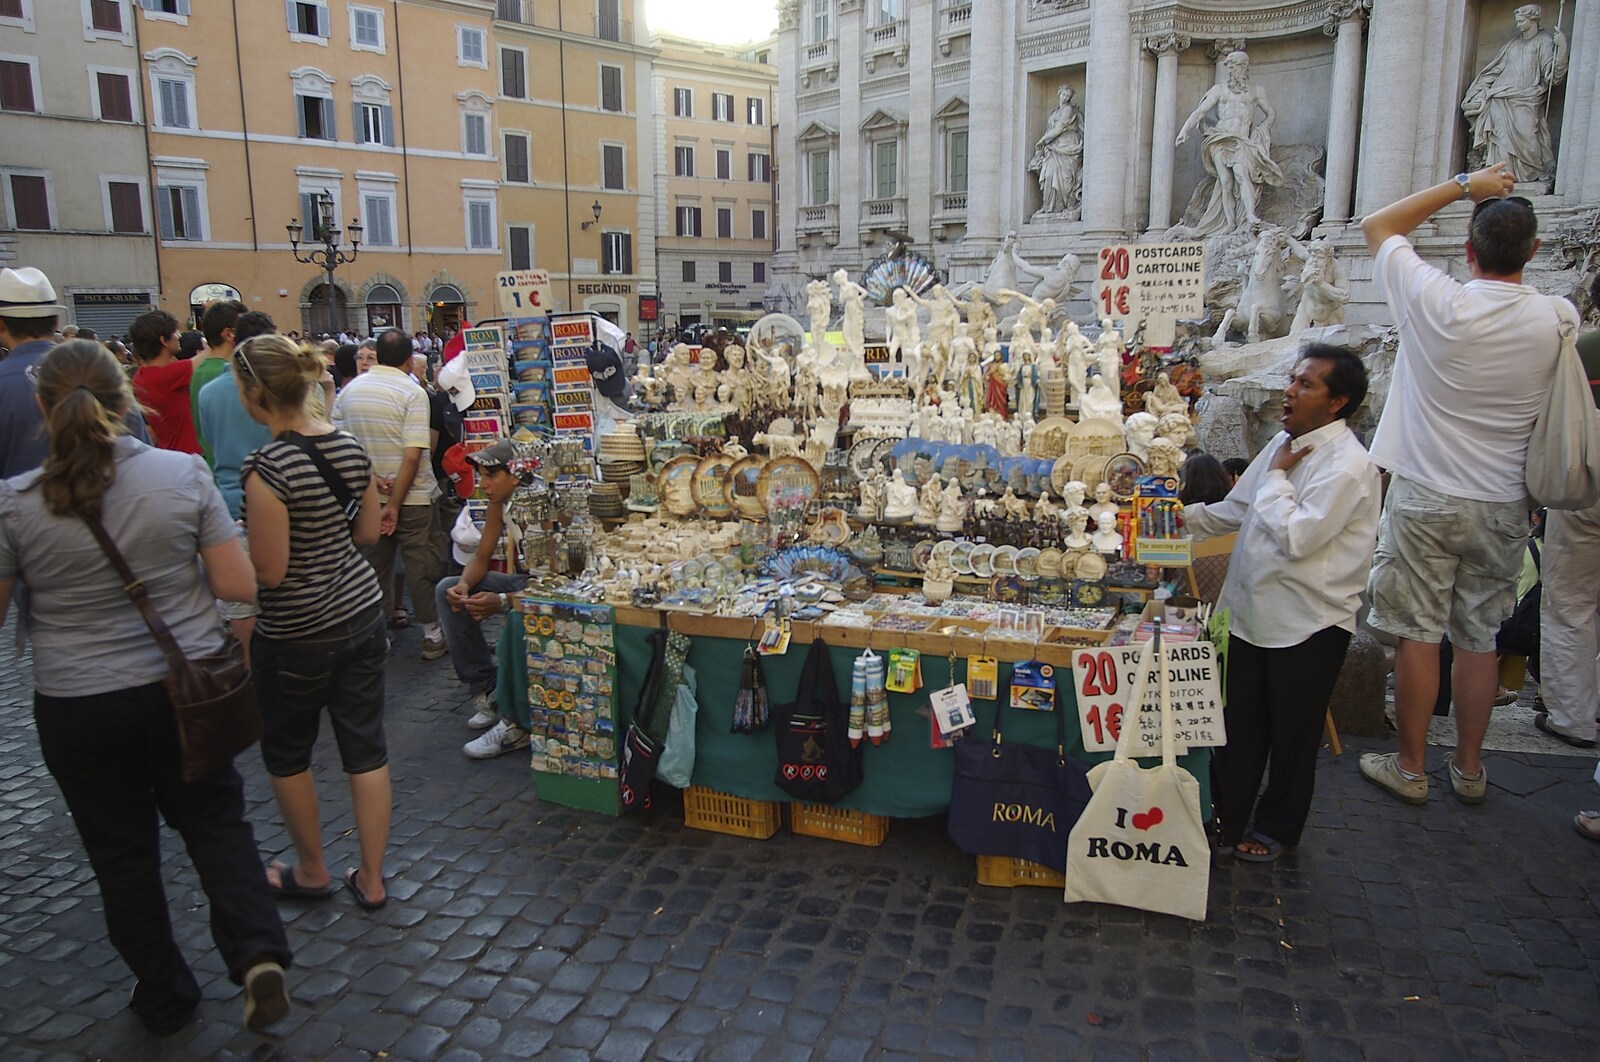 A tat-seller shouts for business from A Sojourn in The Eternal City, Rome, Italy - 22nd July 2008